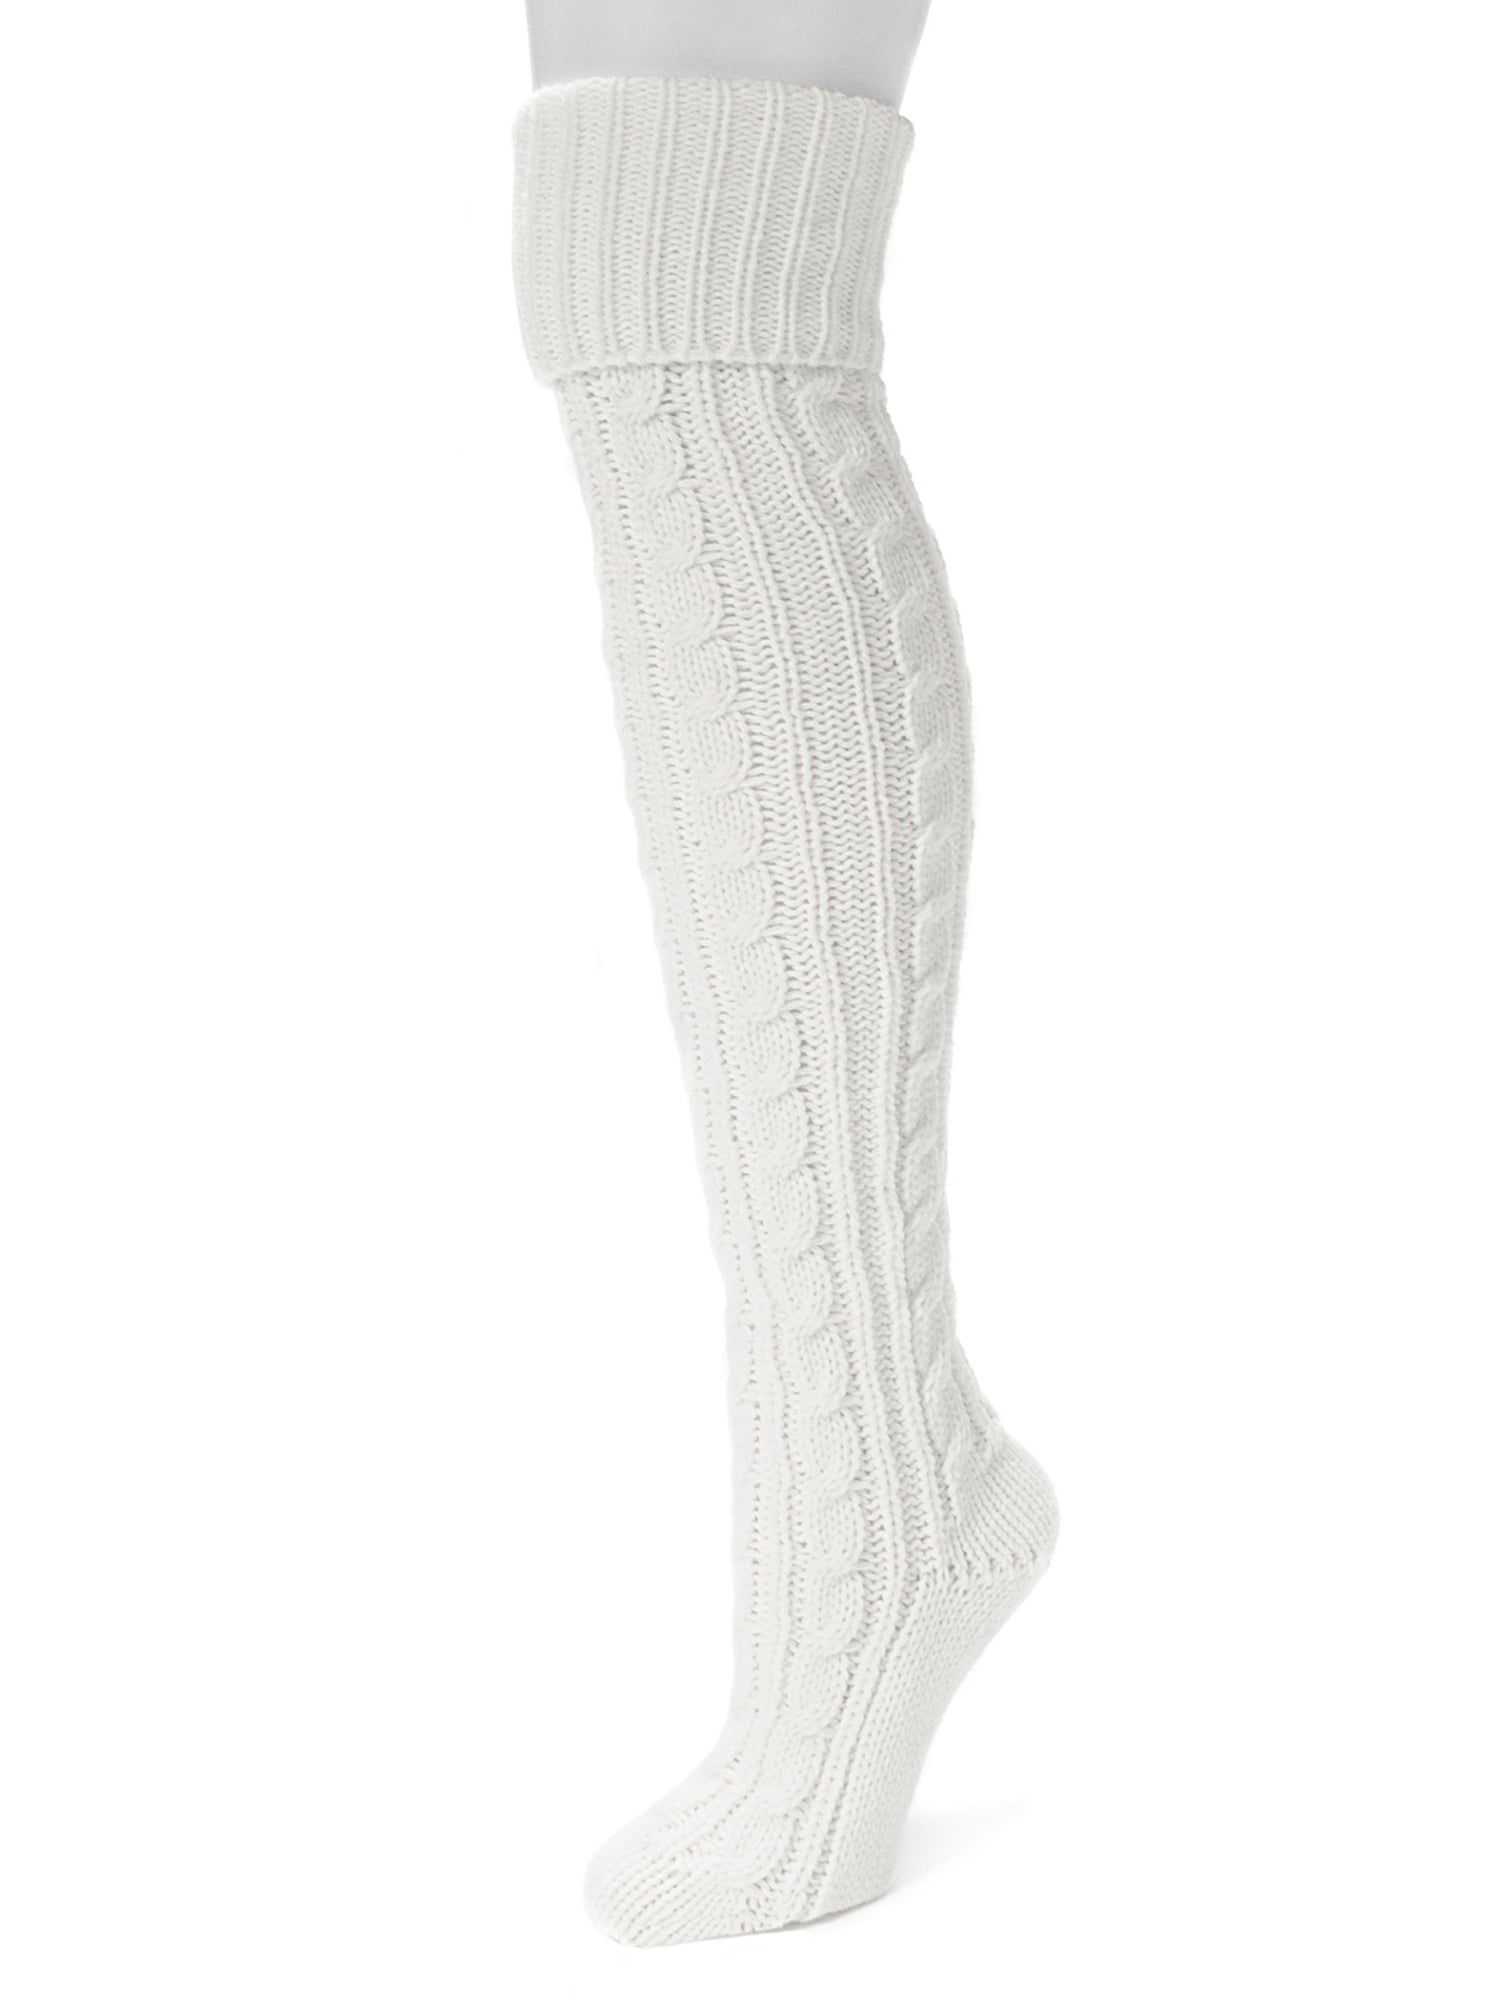 Women's Cable Knit Over the Knee Socks - Walmart.com